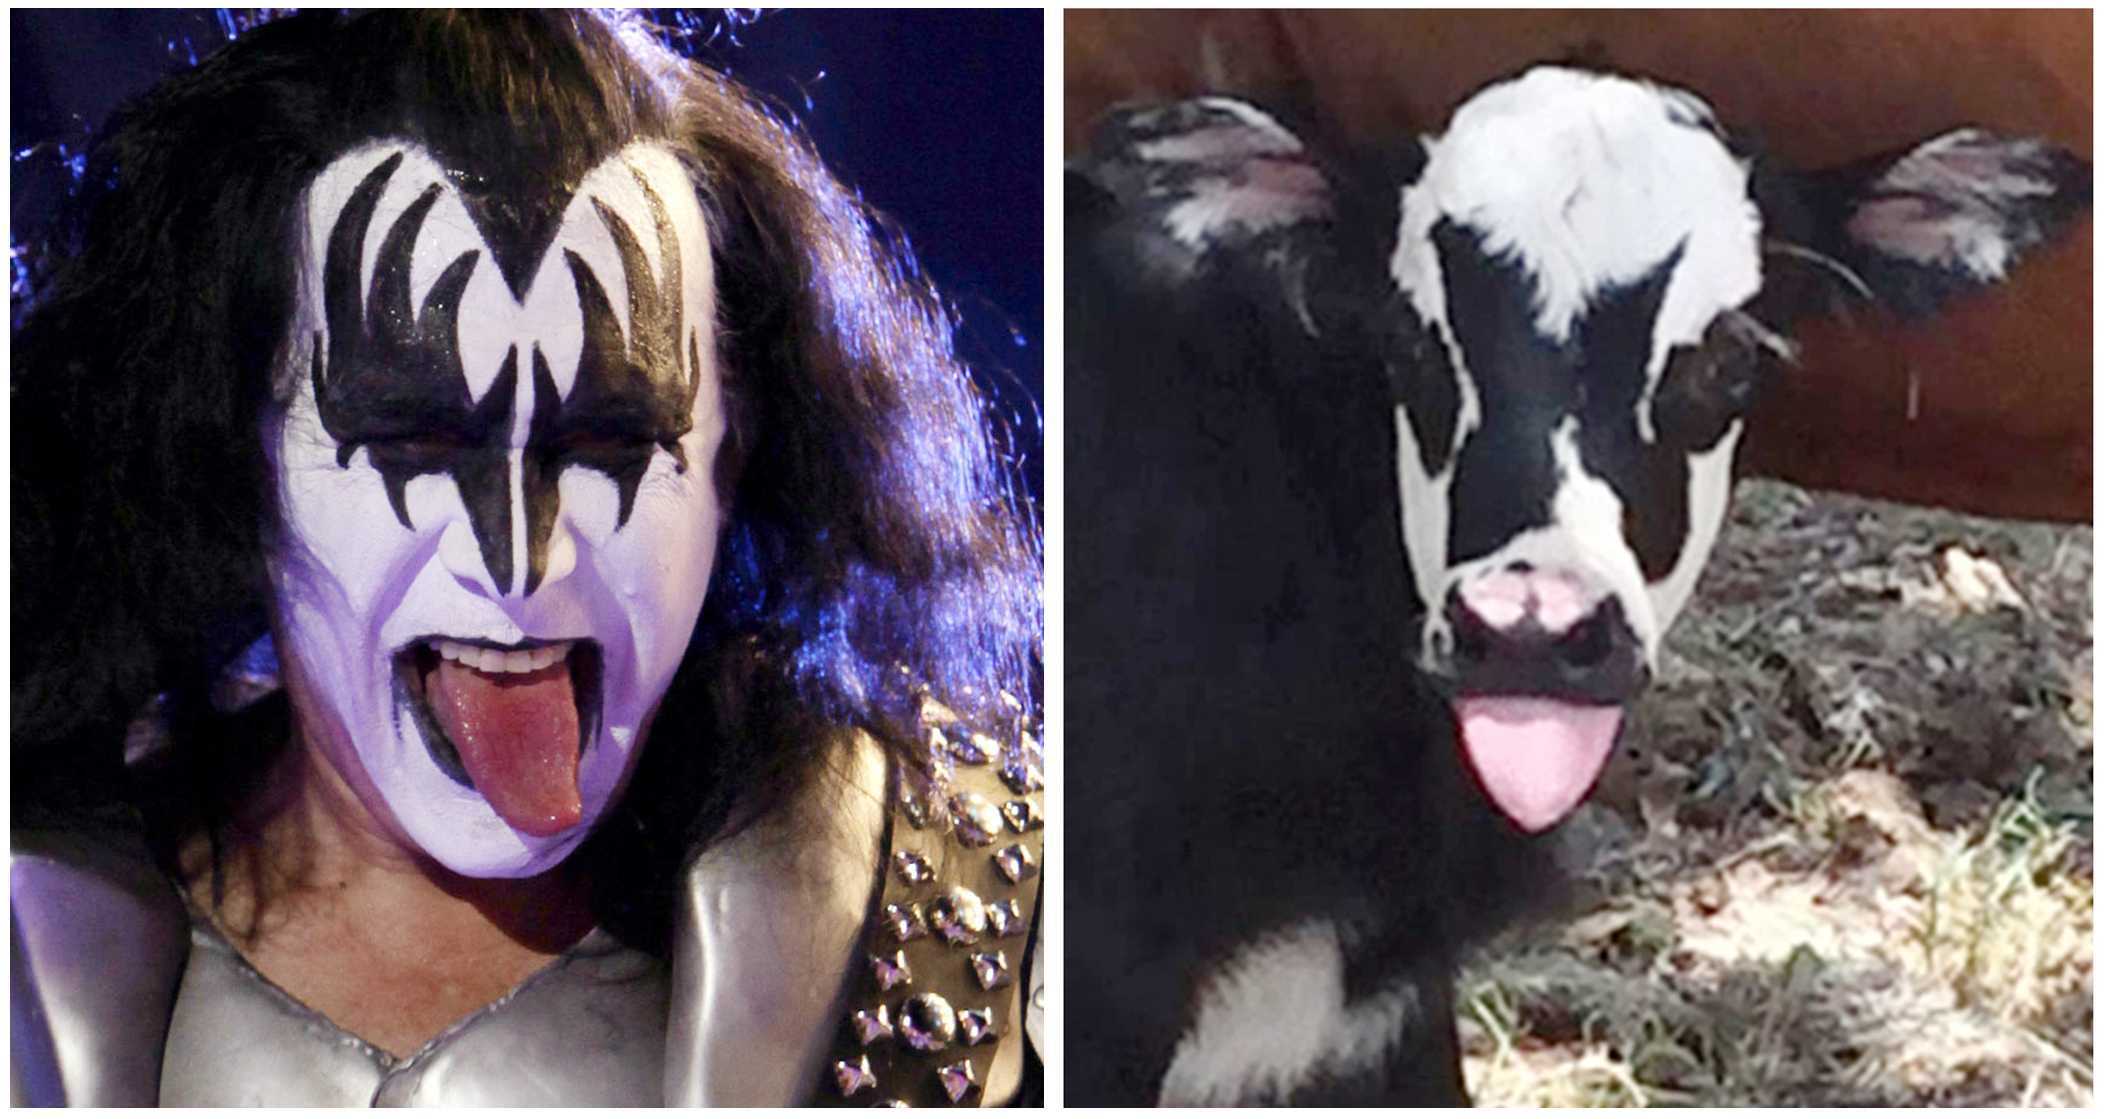 This calf is not a rock star, it just looks like one